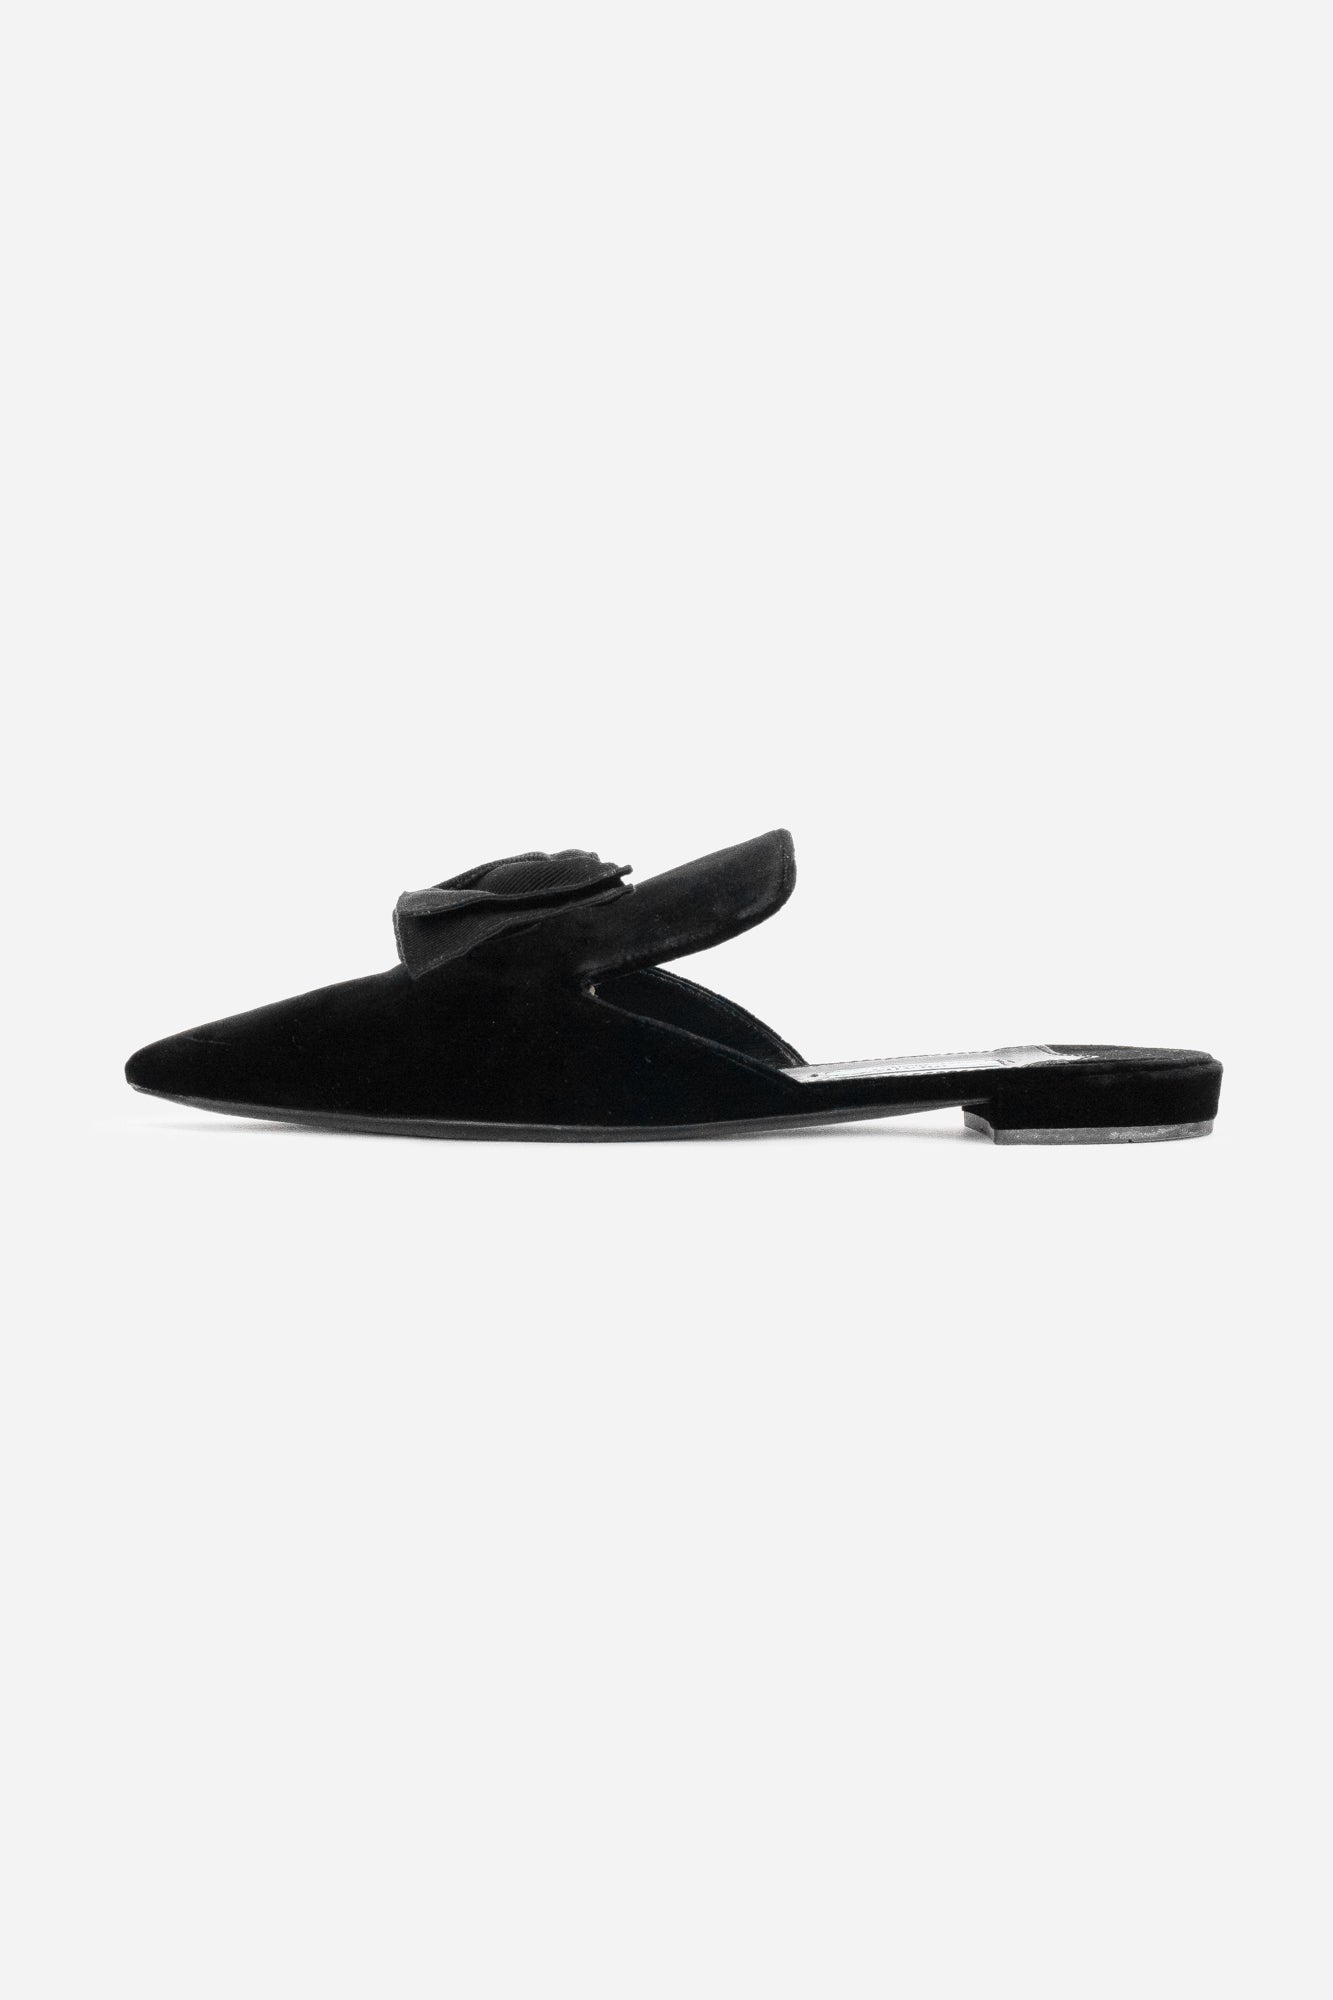 Black Velvet Pointed Toe Mules with Bow Detail